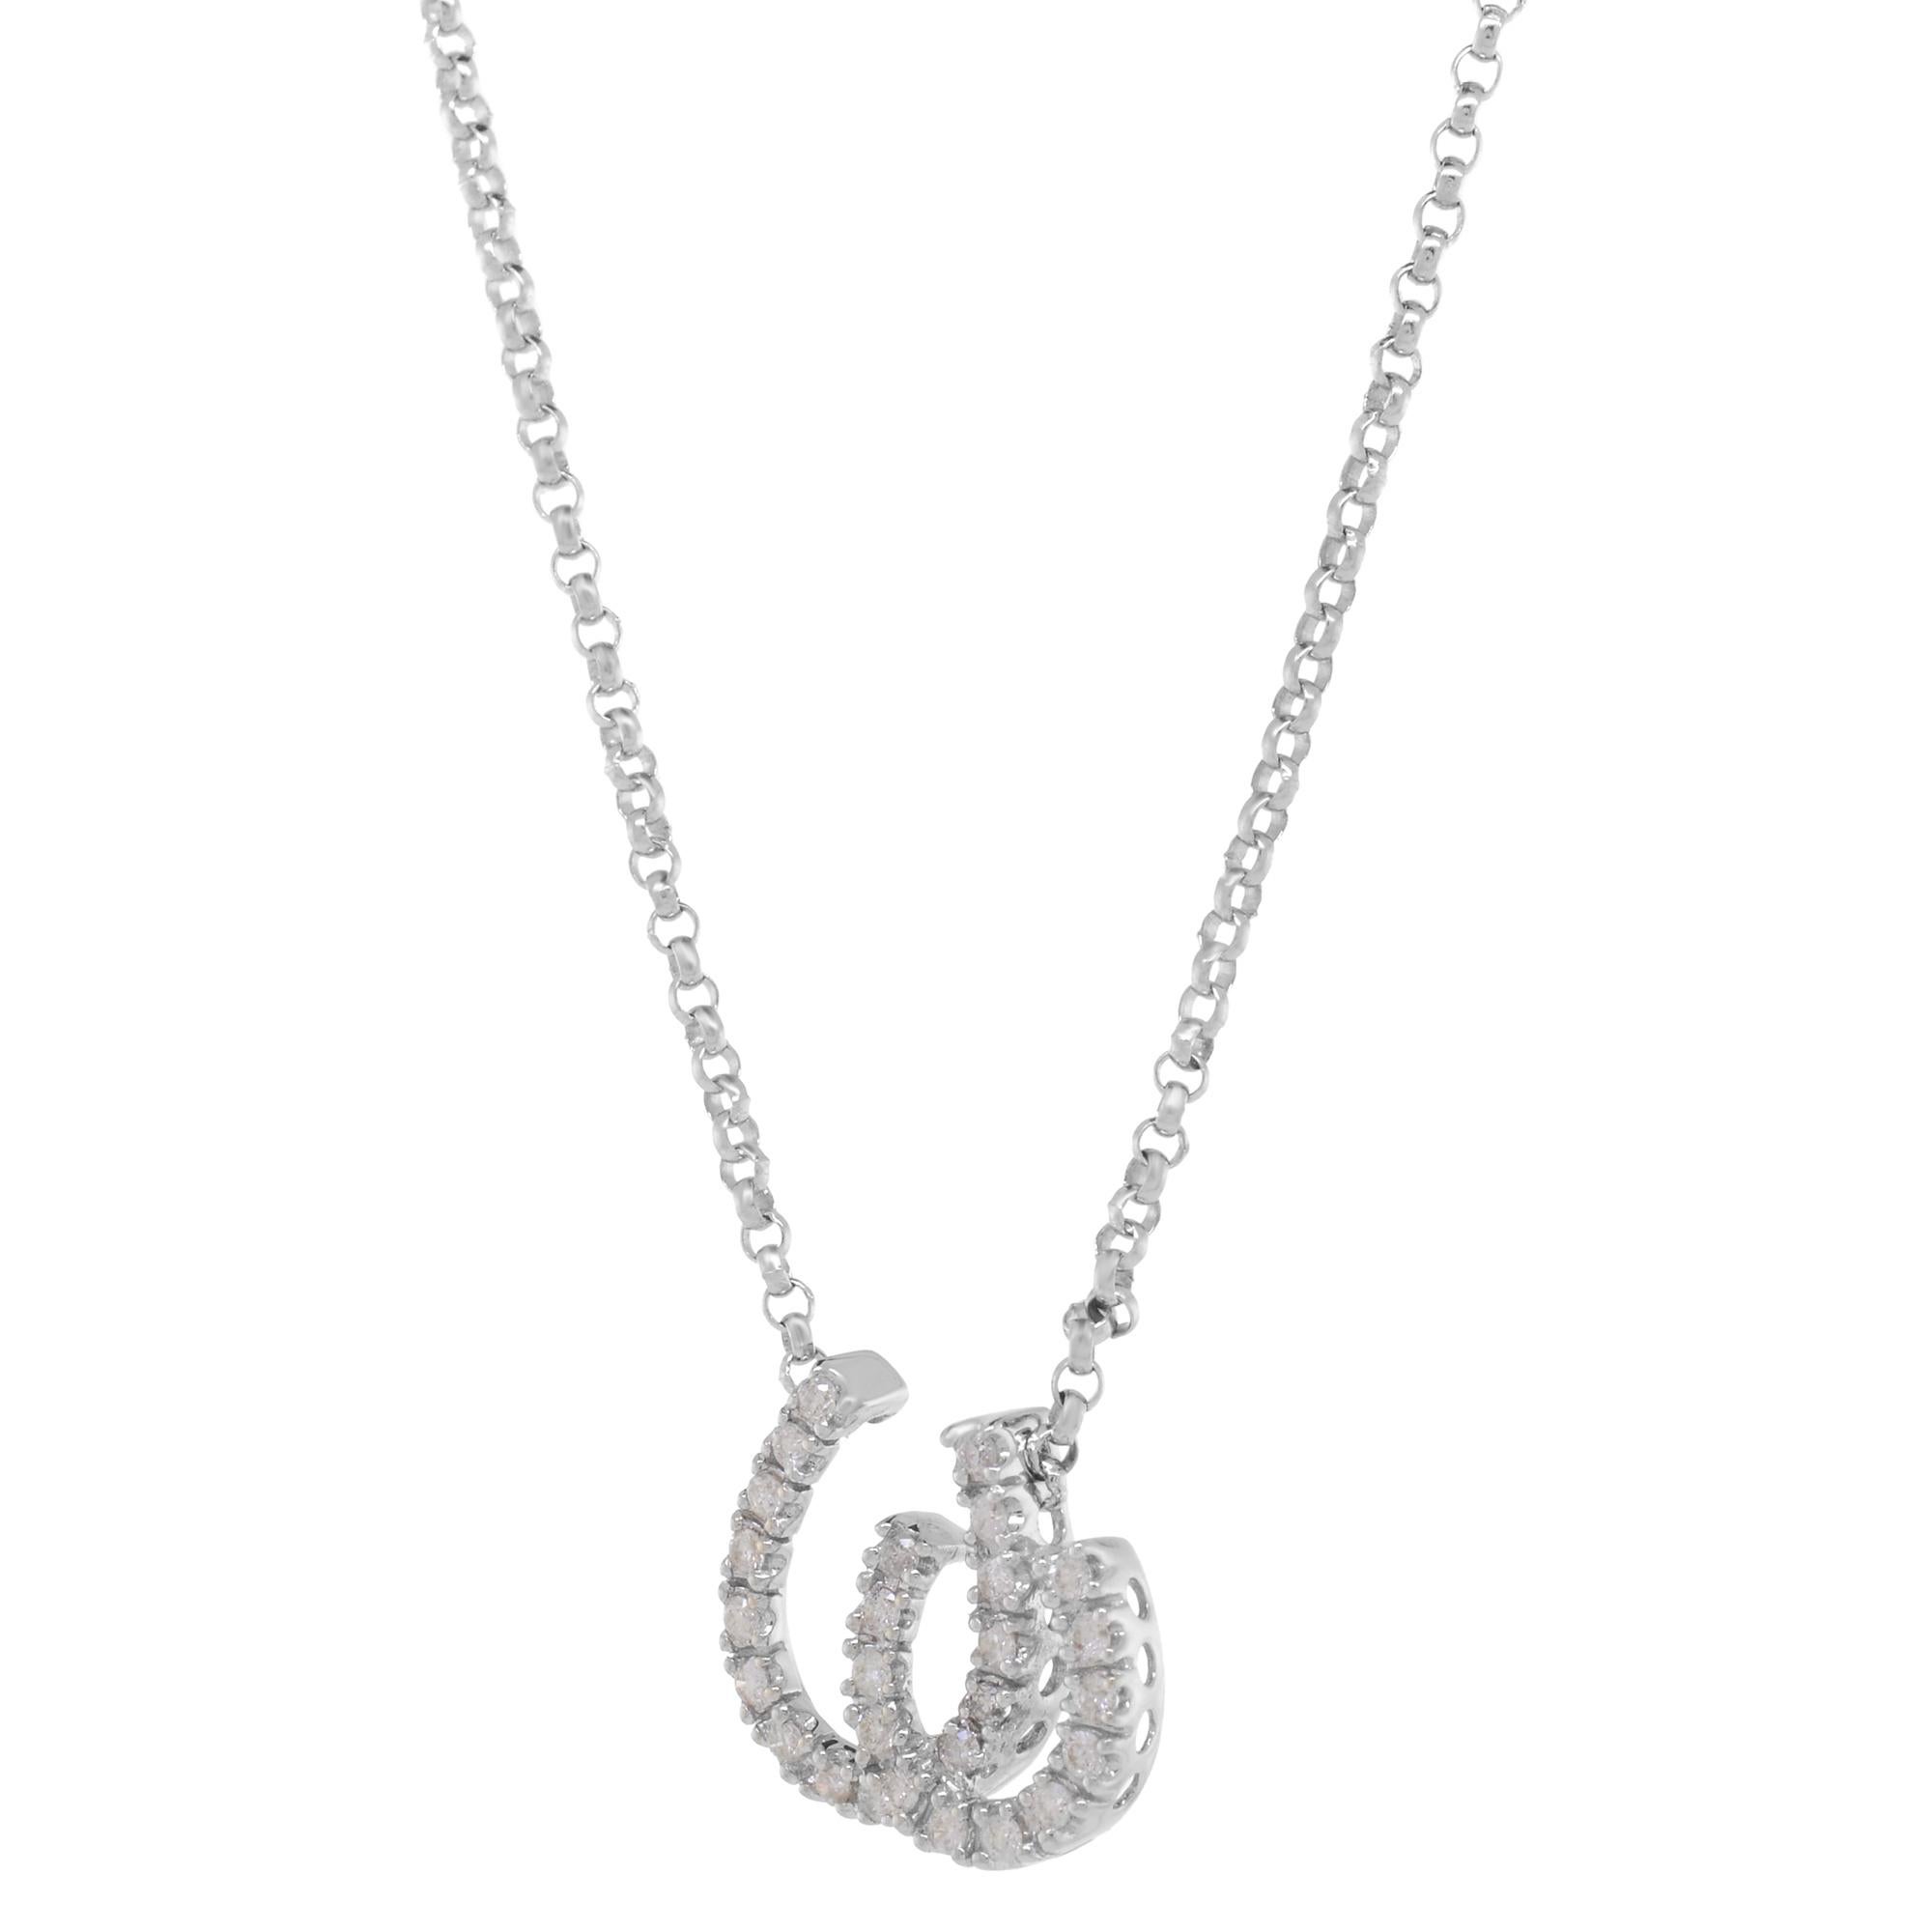 This beautiful double horseshoe diamond chain pendant necklace brings luck and happiness to anyone who wears it. Crafted in 14K white gold, it features a 12 mm long pendant with prong set round cut diamonds placed on a 16 inches cable link chain for